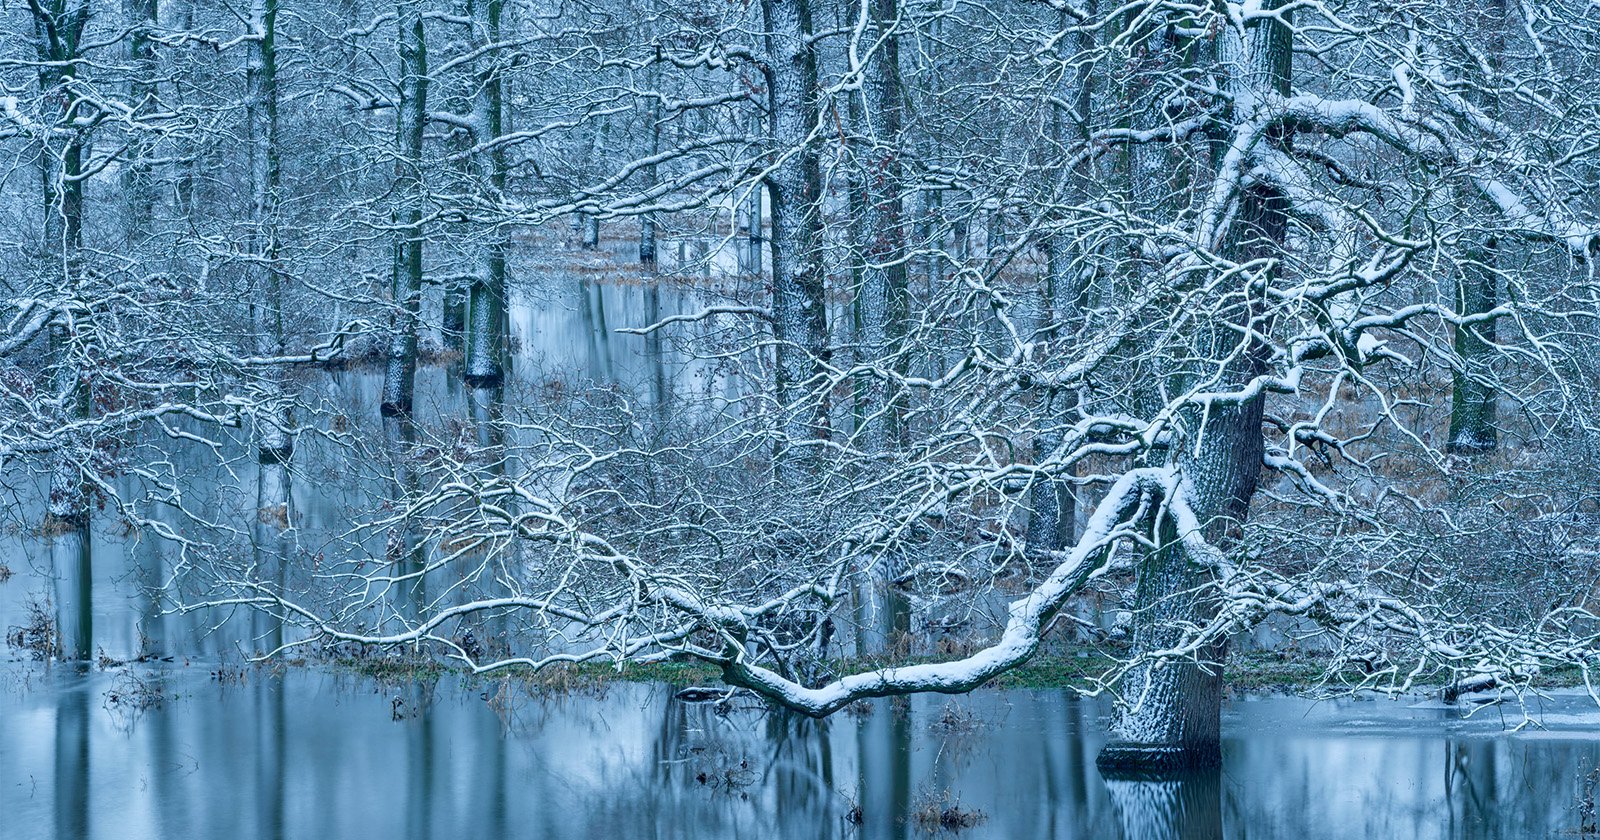 A tranquil winter scene of a forest with snow-covered trees. The bare branches are coated in snow, some dipping into a reflective, partially frozen body of water. The muted blues and whites create a serene and chilly atmosphere.